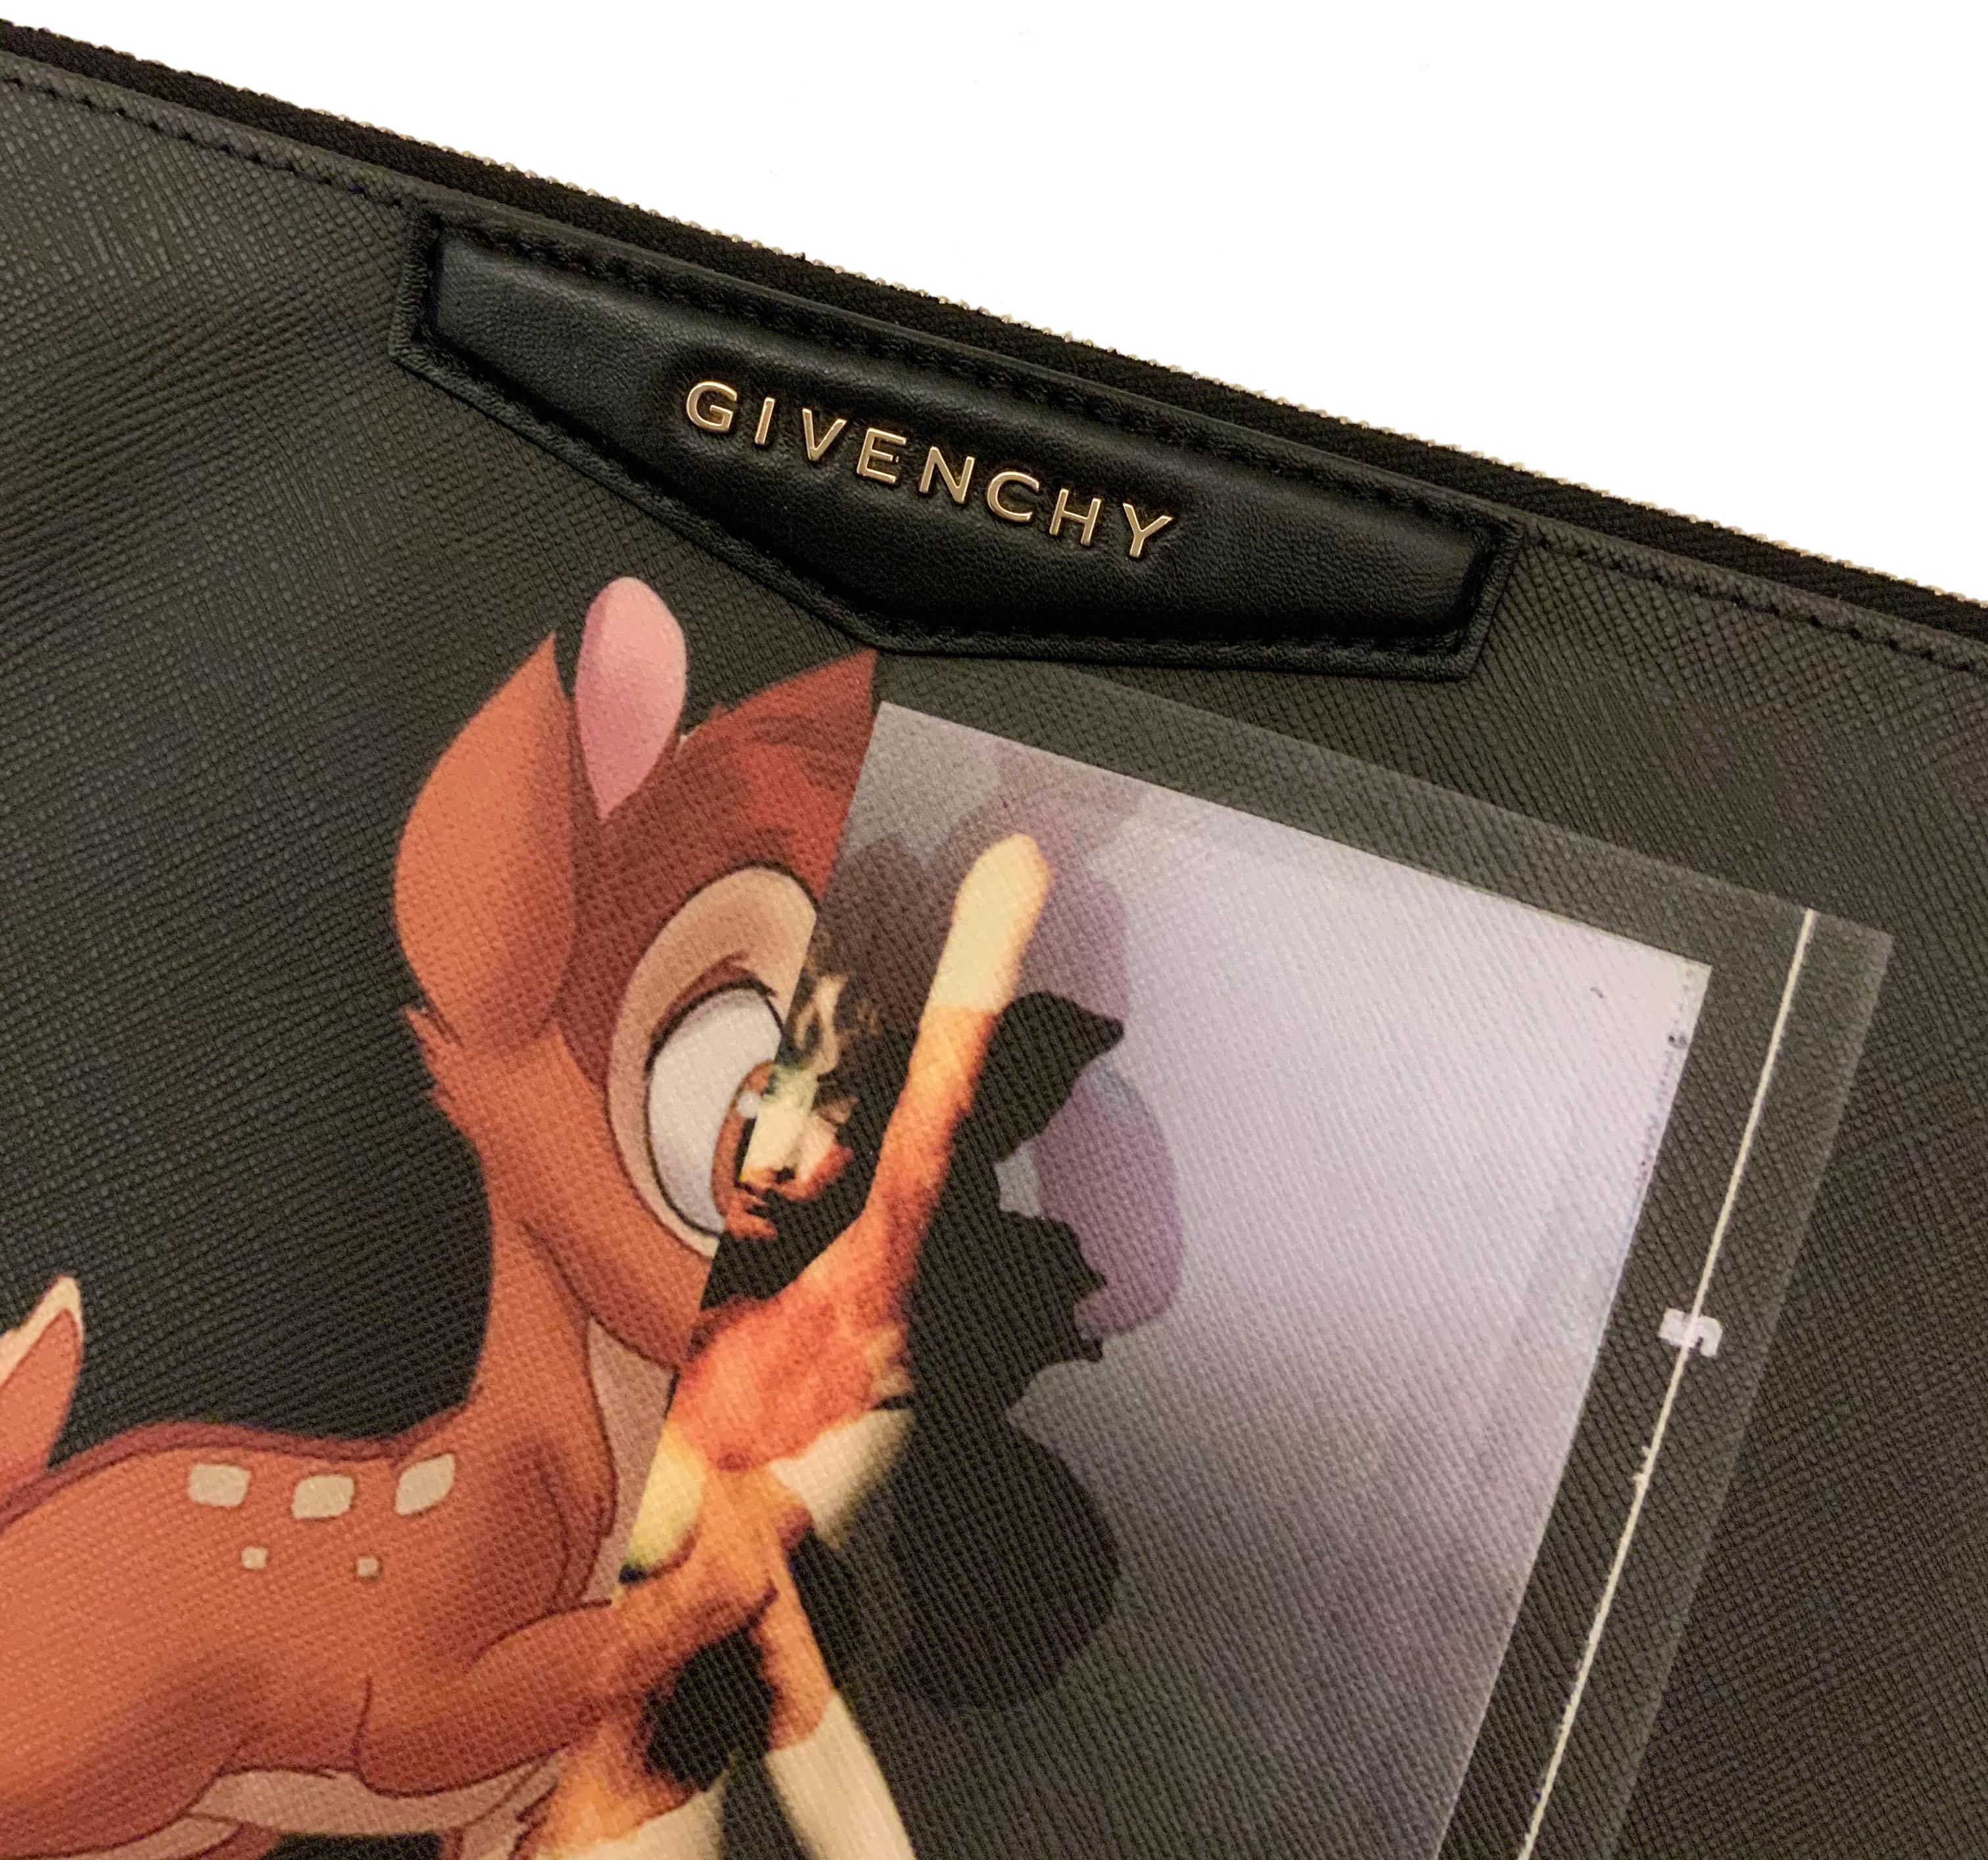 This pre-owned Givenchy 